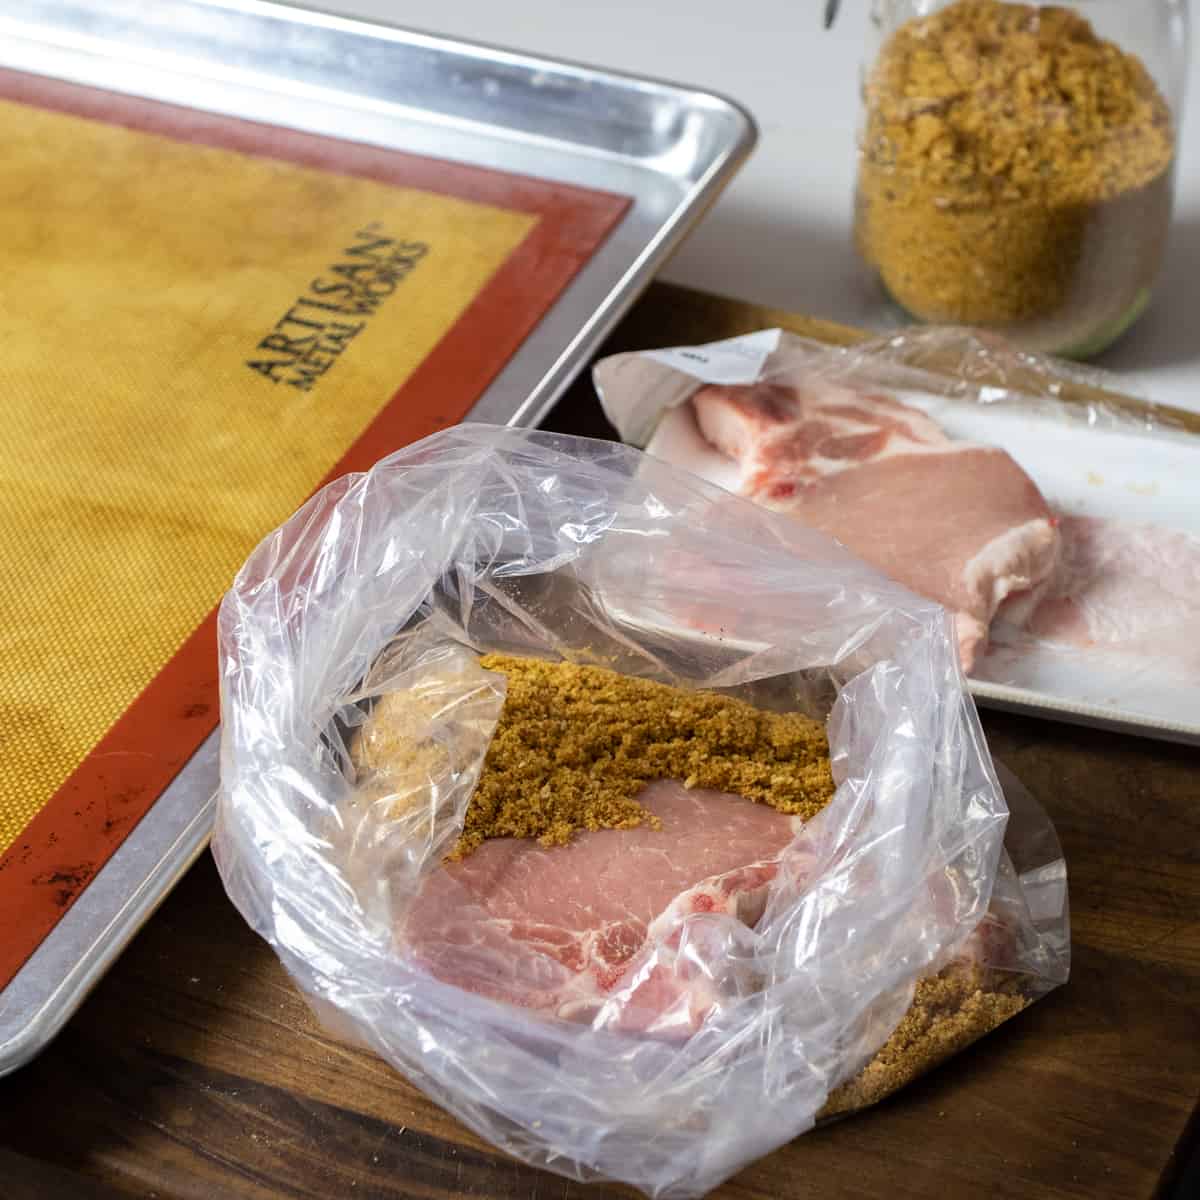 Pork chop and breading mixture added to a clear plastic bag.